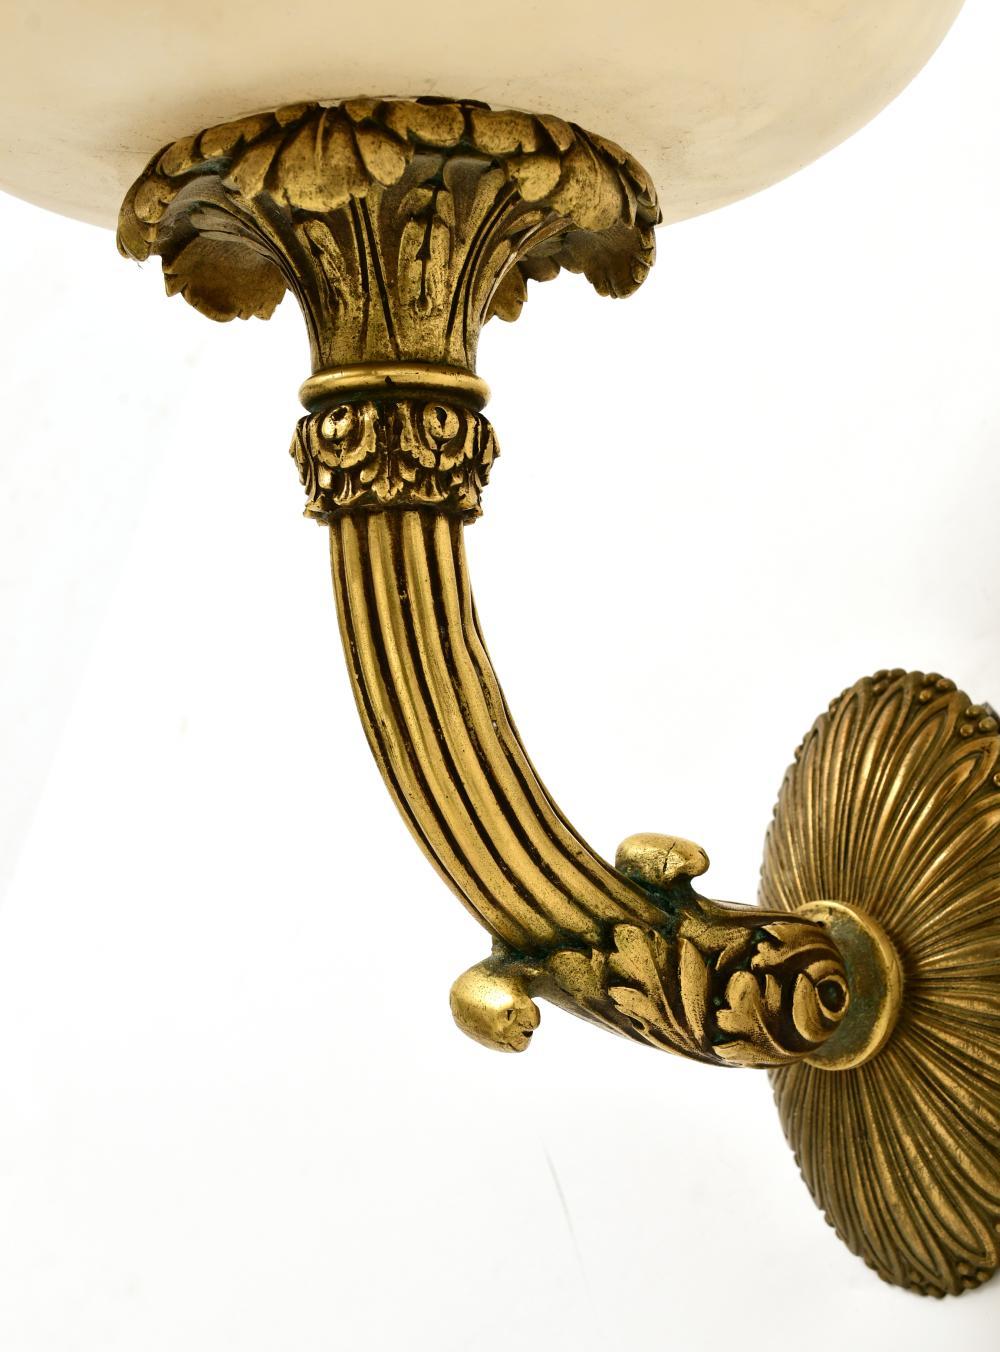 A pair of alabaster Caldwell sconces in a Louis XVI-style design. The curved arms are finely chased with the original signature Caldwell patina. With oval backplates having leaf tip detail and original oversized alabaster shades. Early 20th Century.